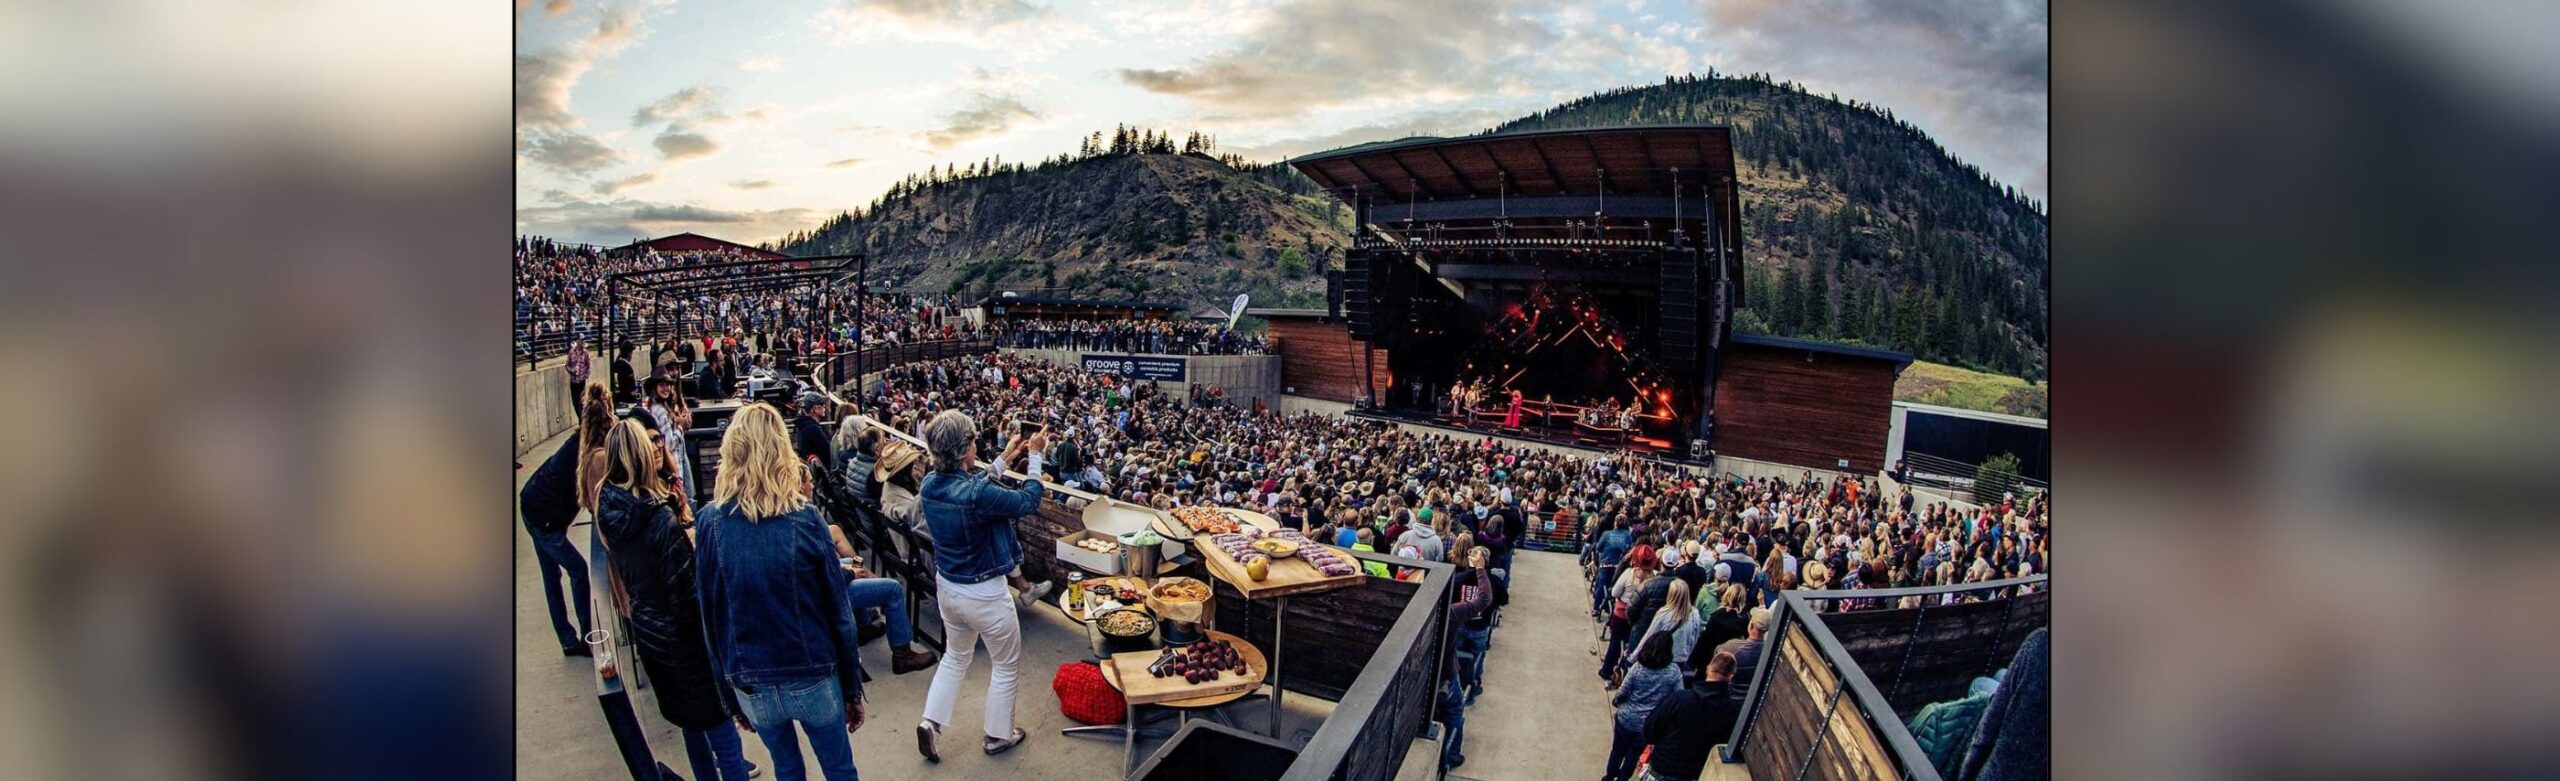 SPECIAL OFFER: Premium Box Released for Greensky Bluegrass with Molly Tuttle & Golden Highways at KettleHouse Amphitheater Image